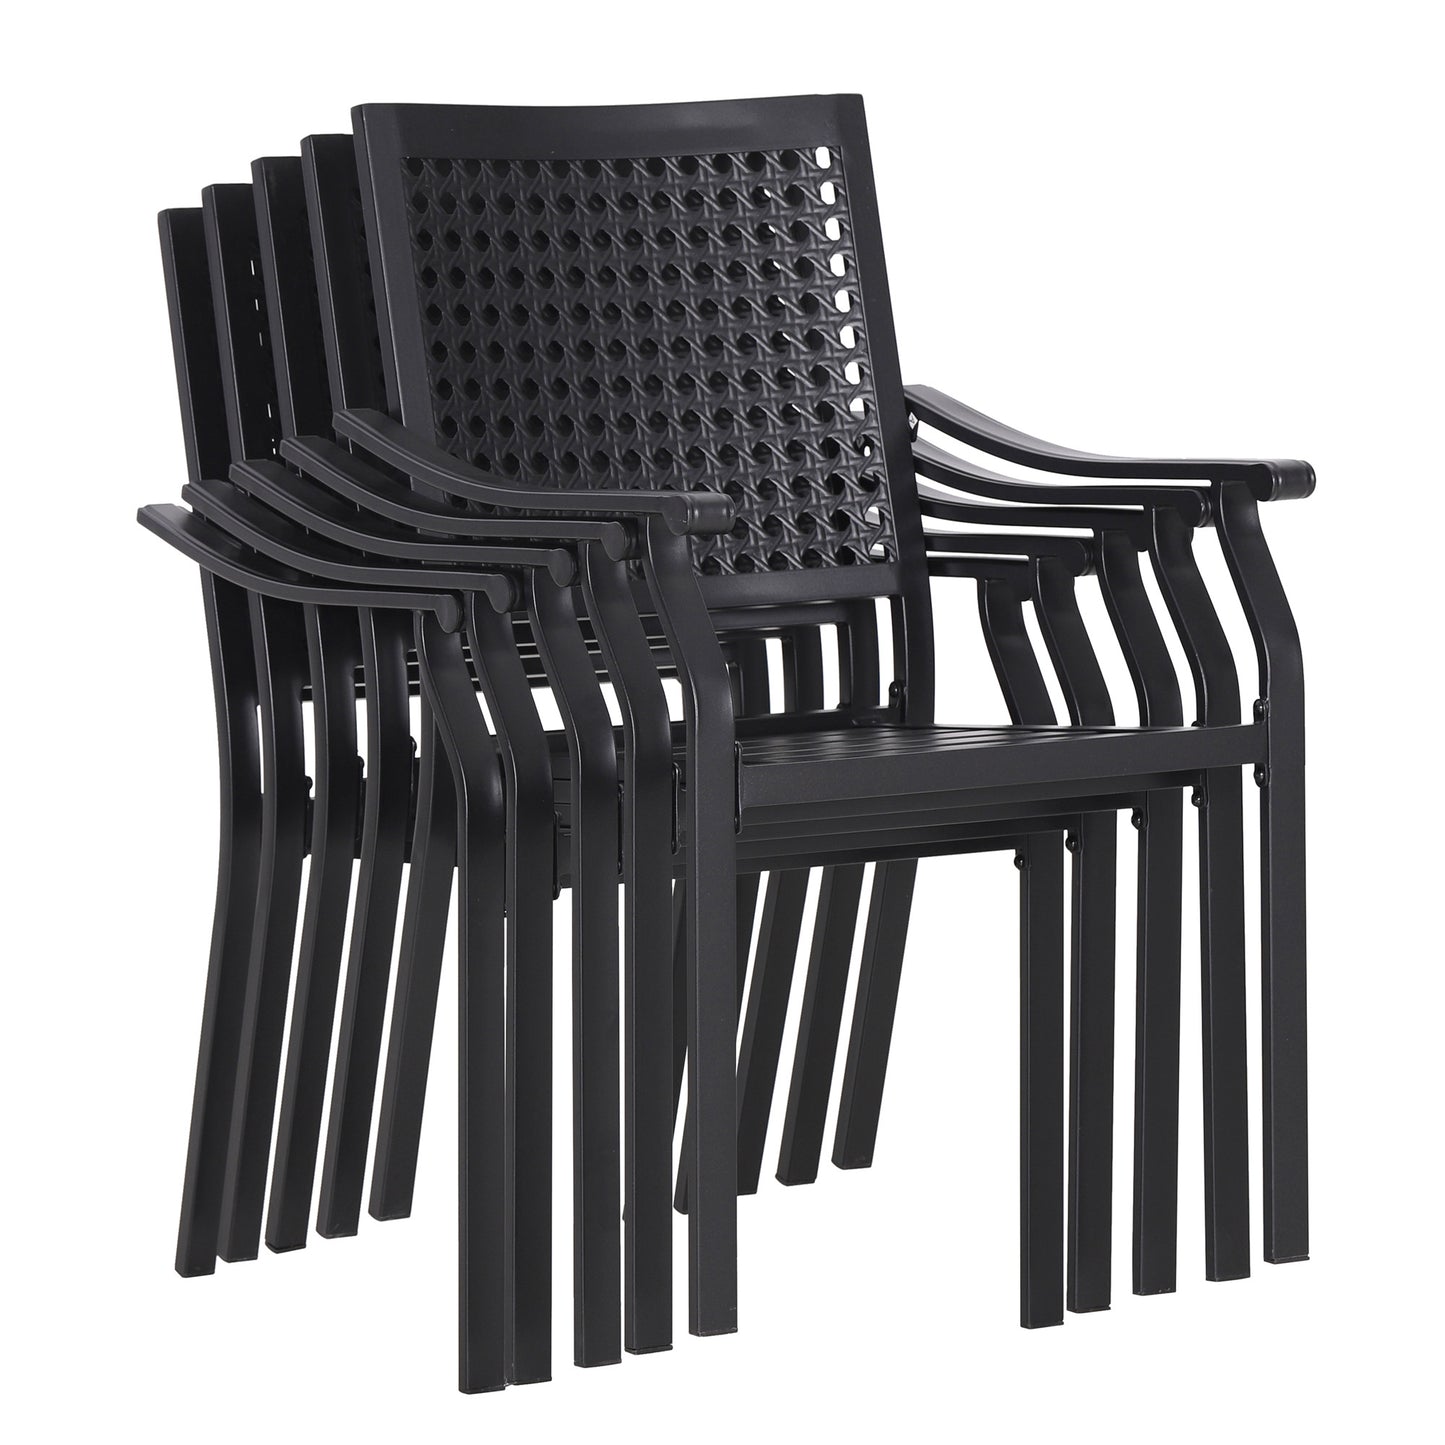 Sophia & William 5 Pieces Patio Outdoor Dining Set Metal Stackable Chairs and Round Table,Black